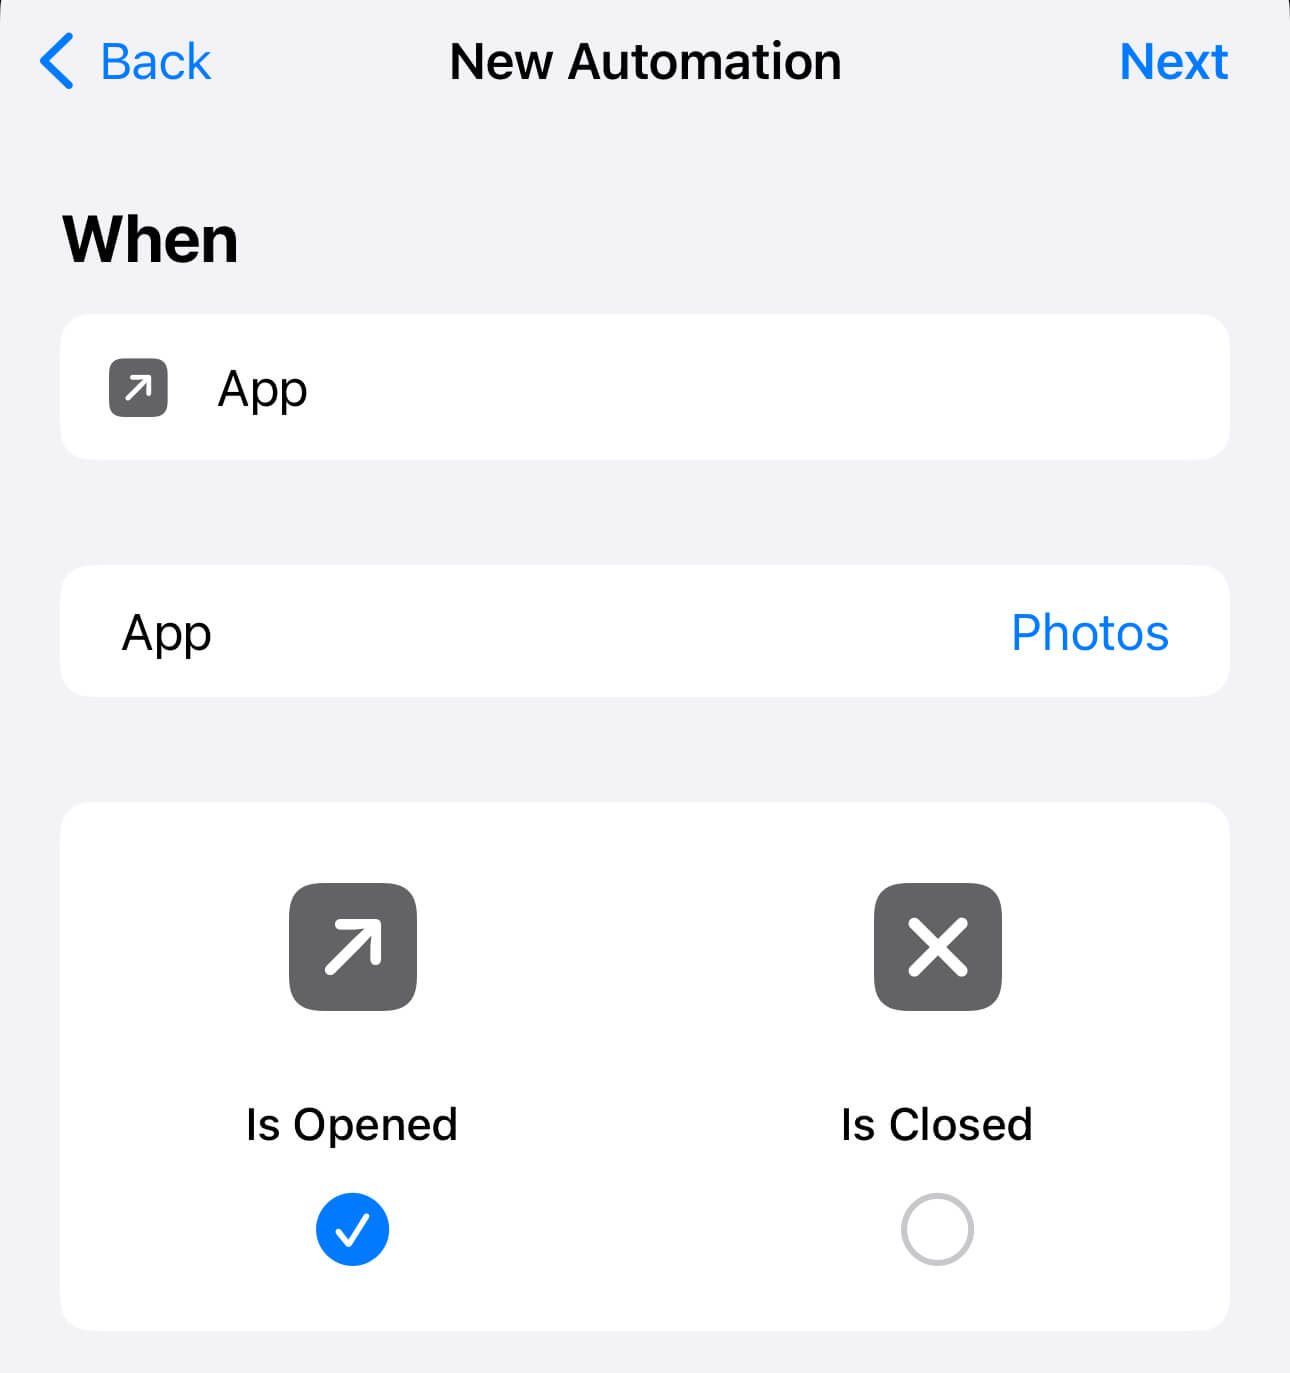 the New Automation screen shows two options of the App trigger